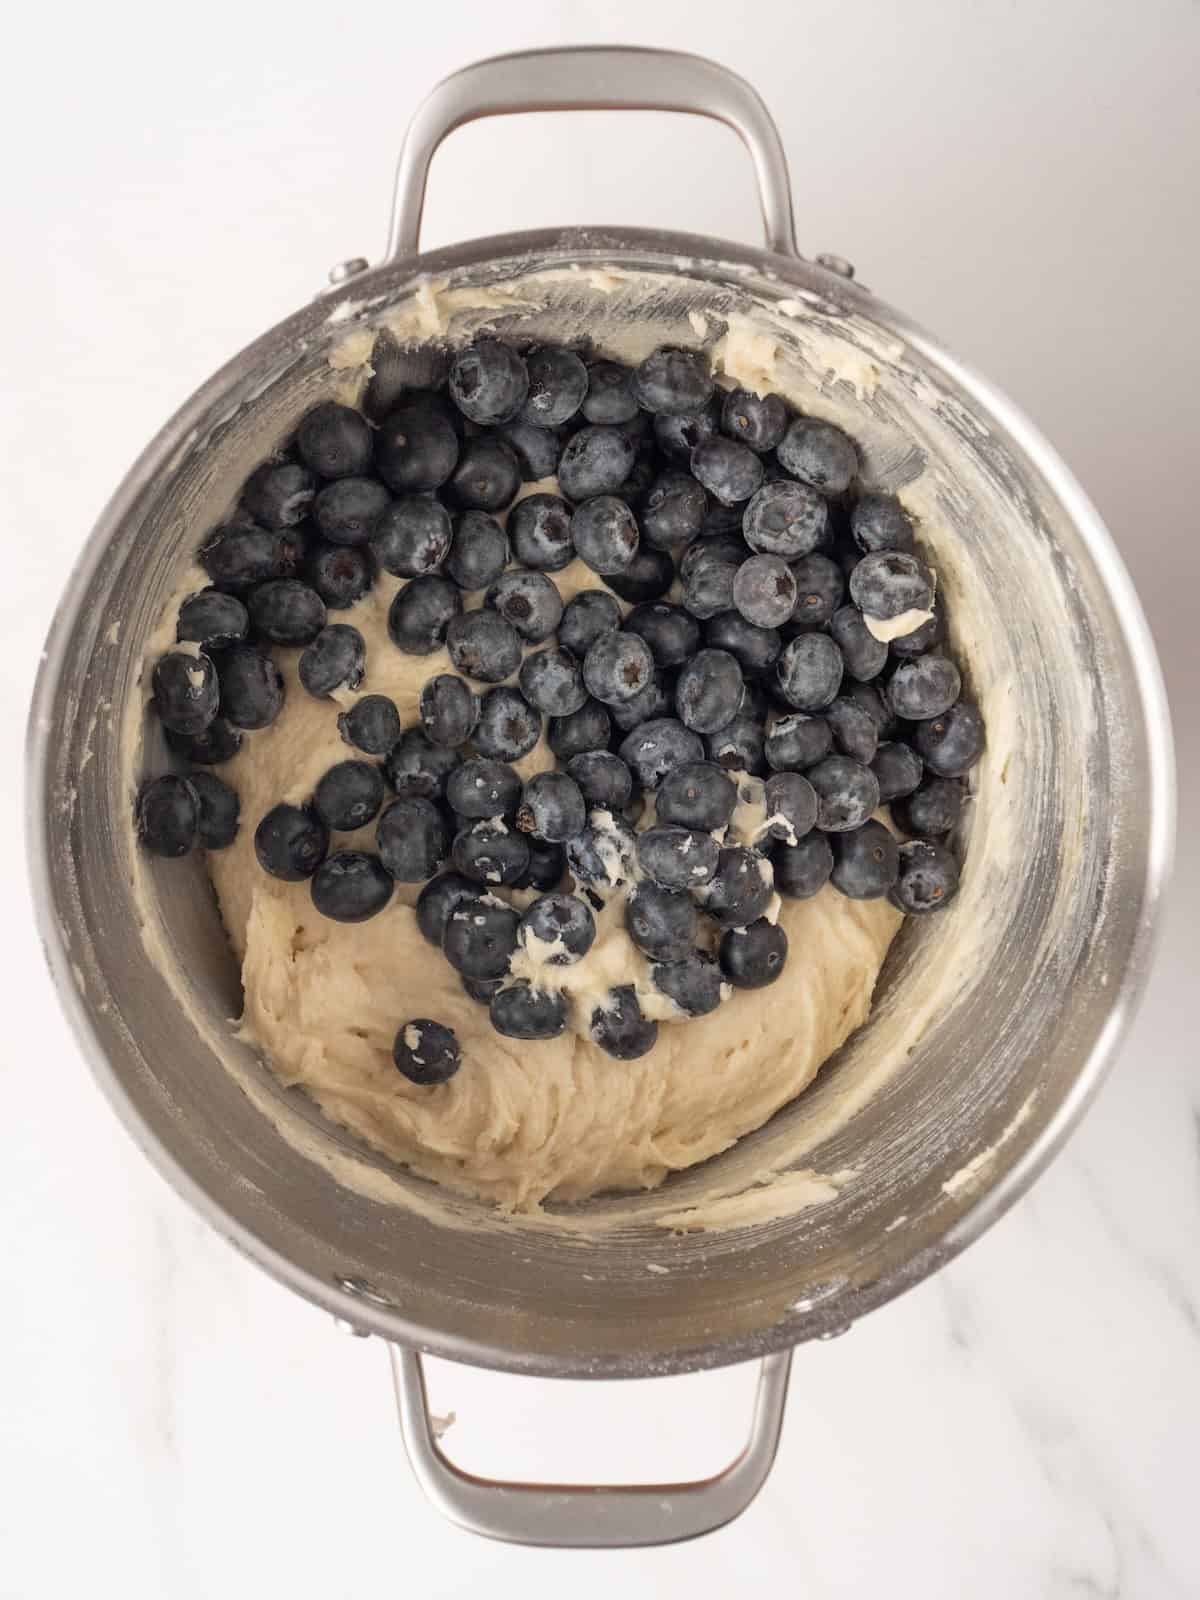 A stand mixer bowl with blueberry crumb muffins batter ready, with blueberries just added to be folded in to the batter.